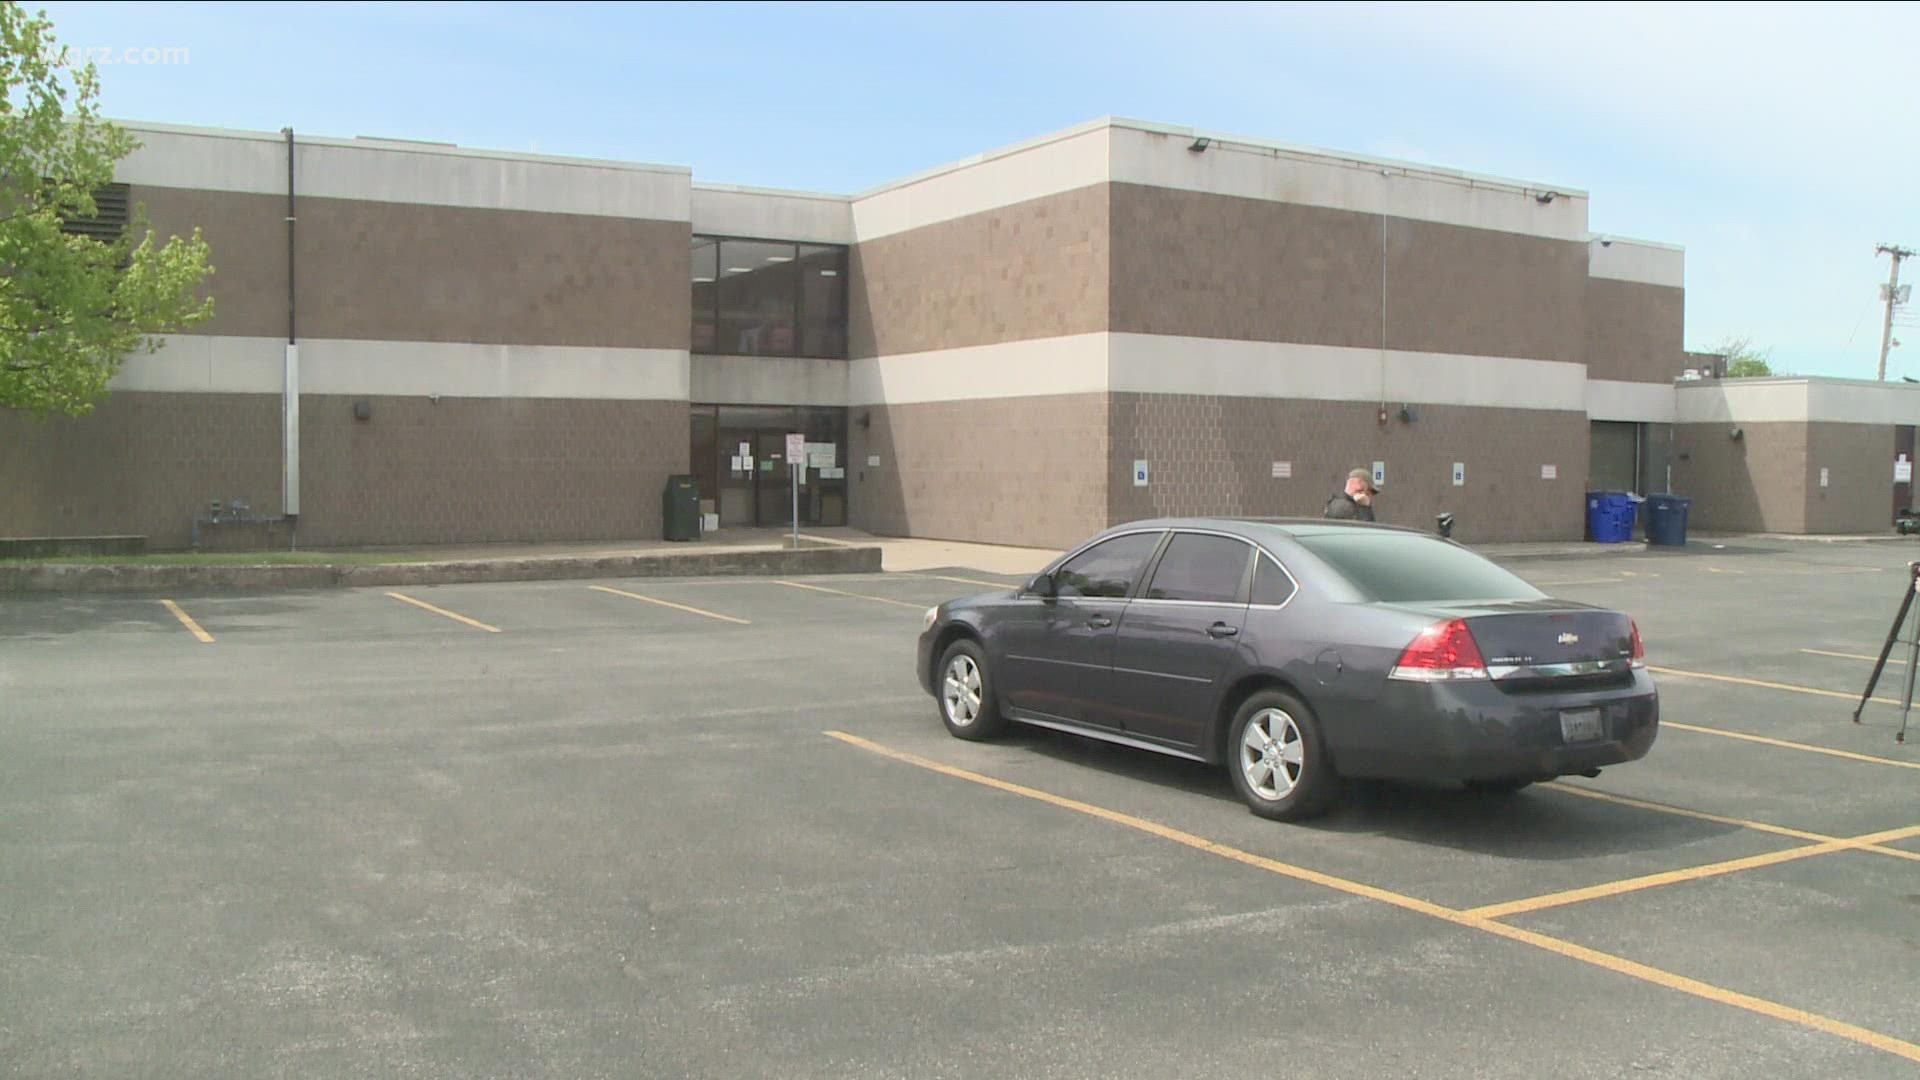 Bomb threat at Erie Co. Health Clinic, no evidence found